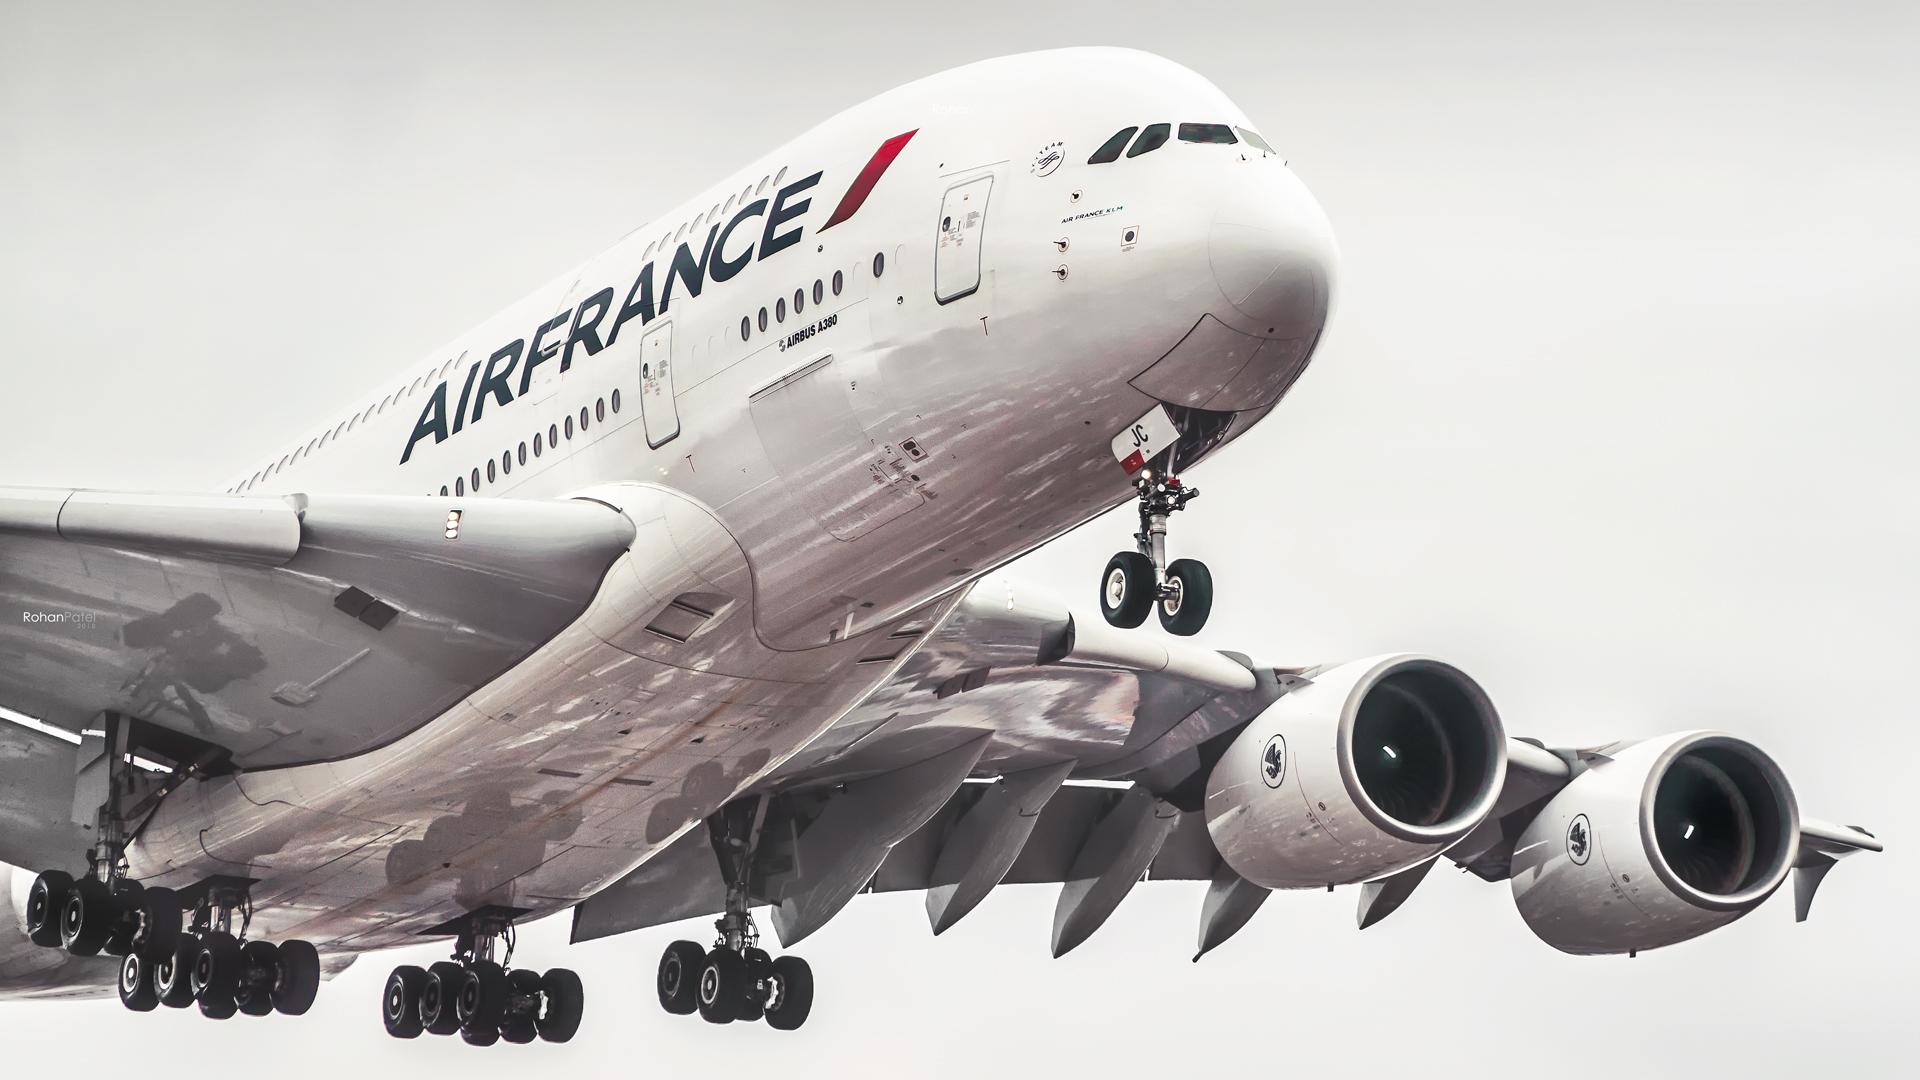 Air France Wallpaper Free Air France Background